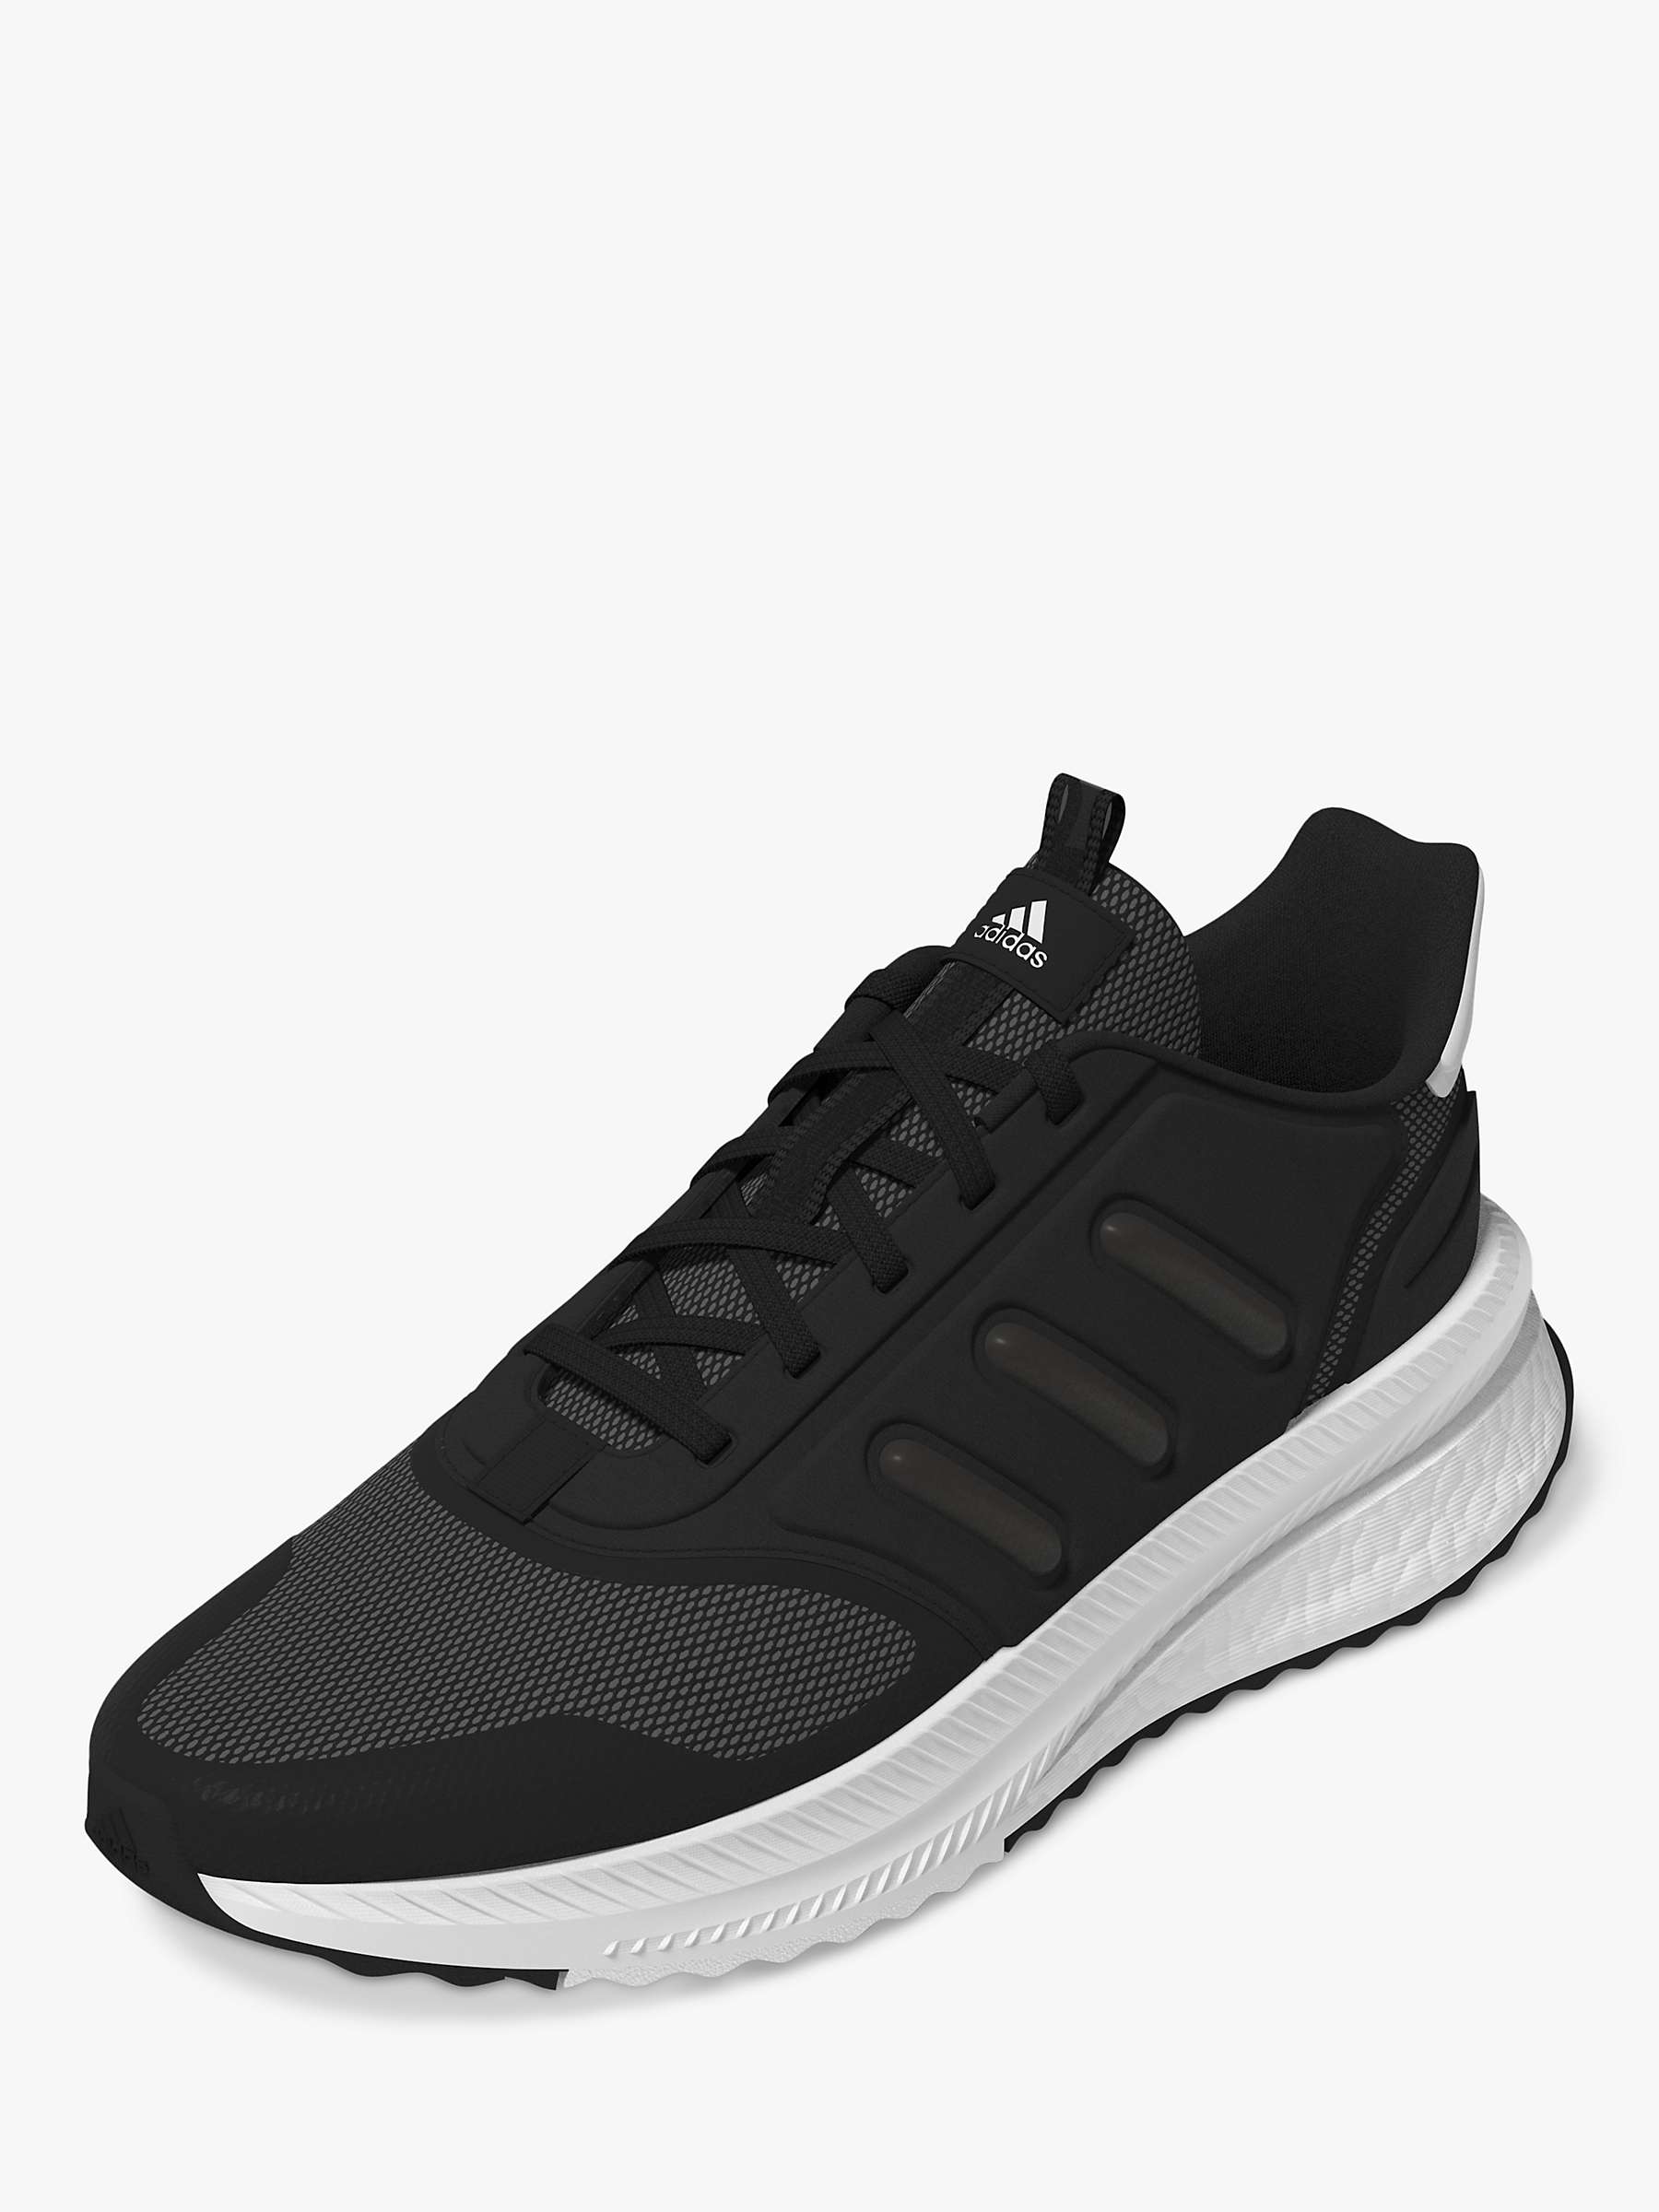 adidas X_PLRPHASE Trainers, Black at John Lewis & Partners